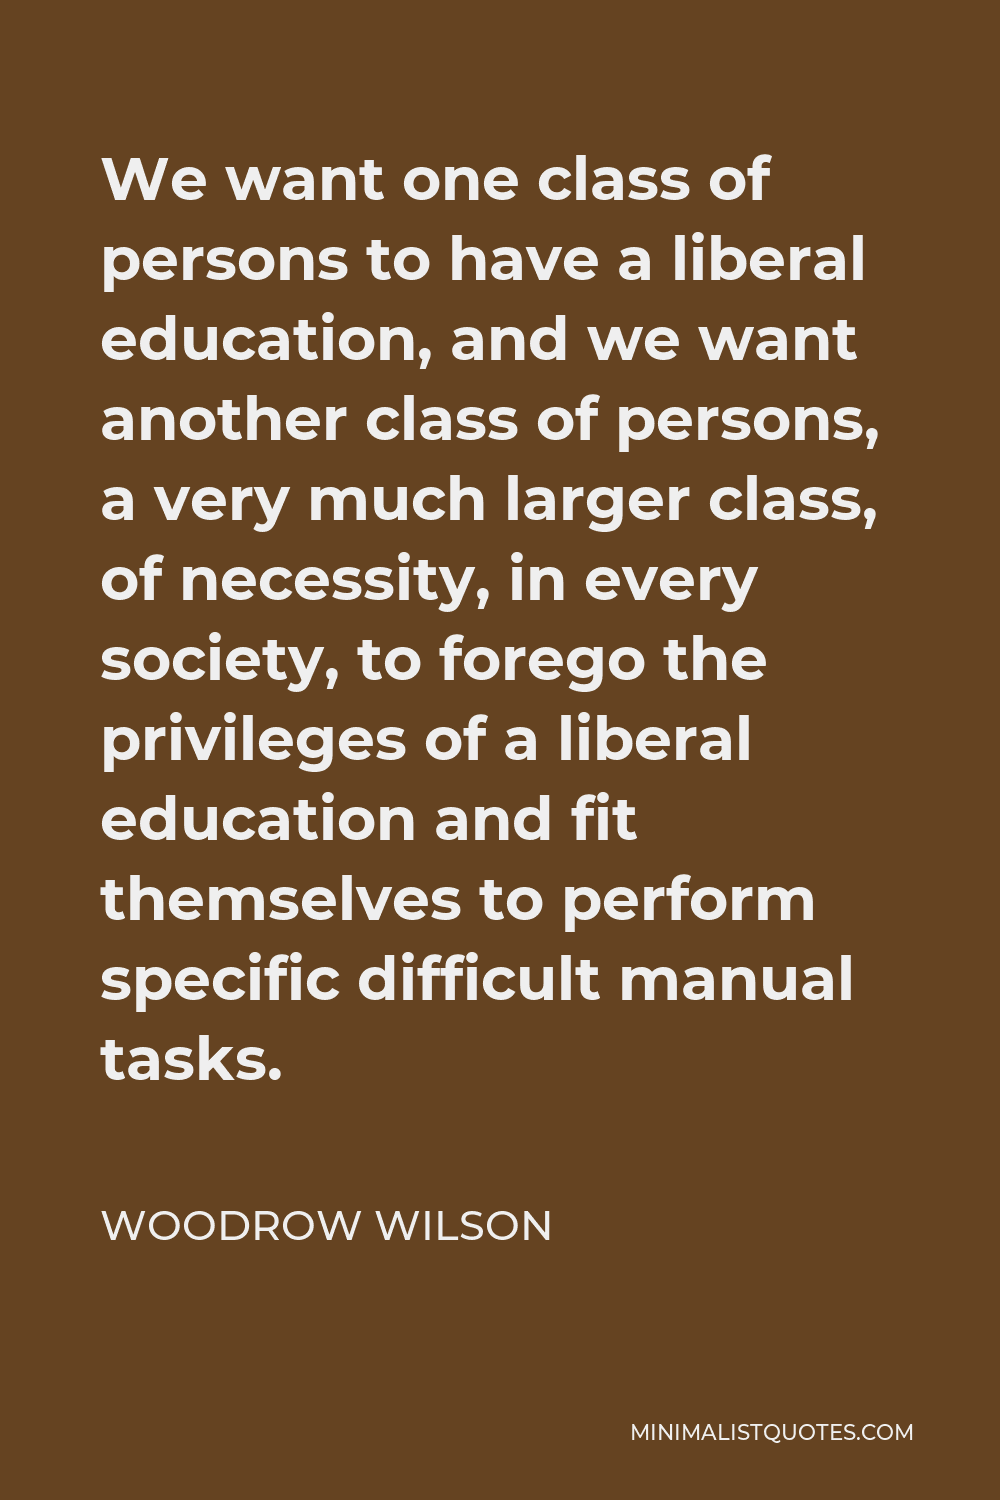 Woodrow Wilson Quote - We want one class of persons to have a liberal education, and we want another class of persons, a very much larger class, of necessity, in every society, to forego the privileges of a liberal education and fit themselves to perform specific difficult manual tasks.